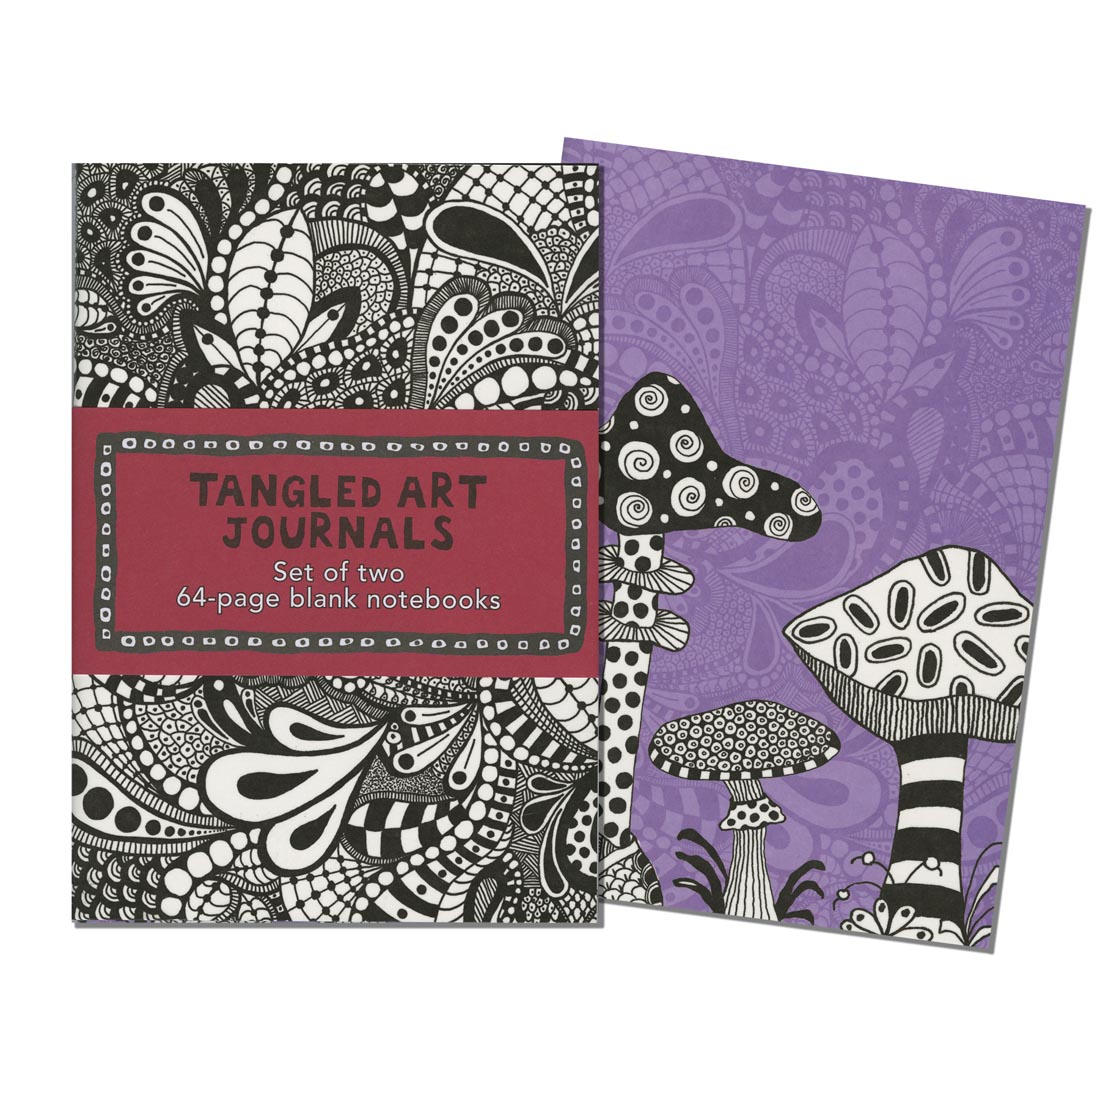 Tangled Art Journals: Set of two